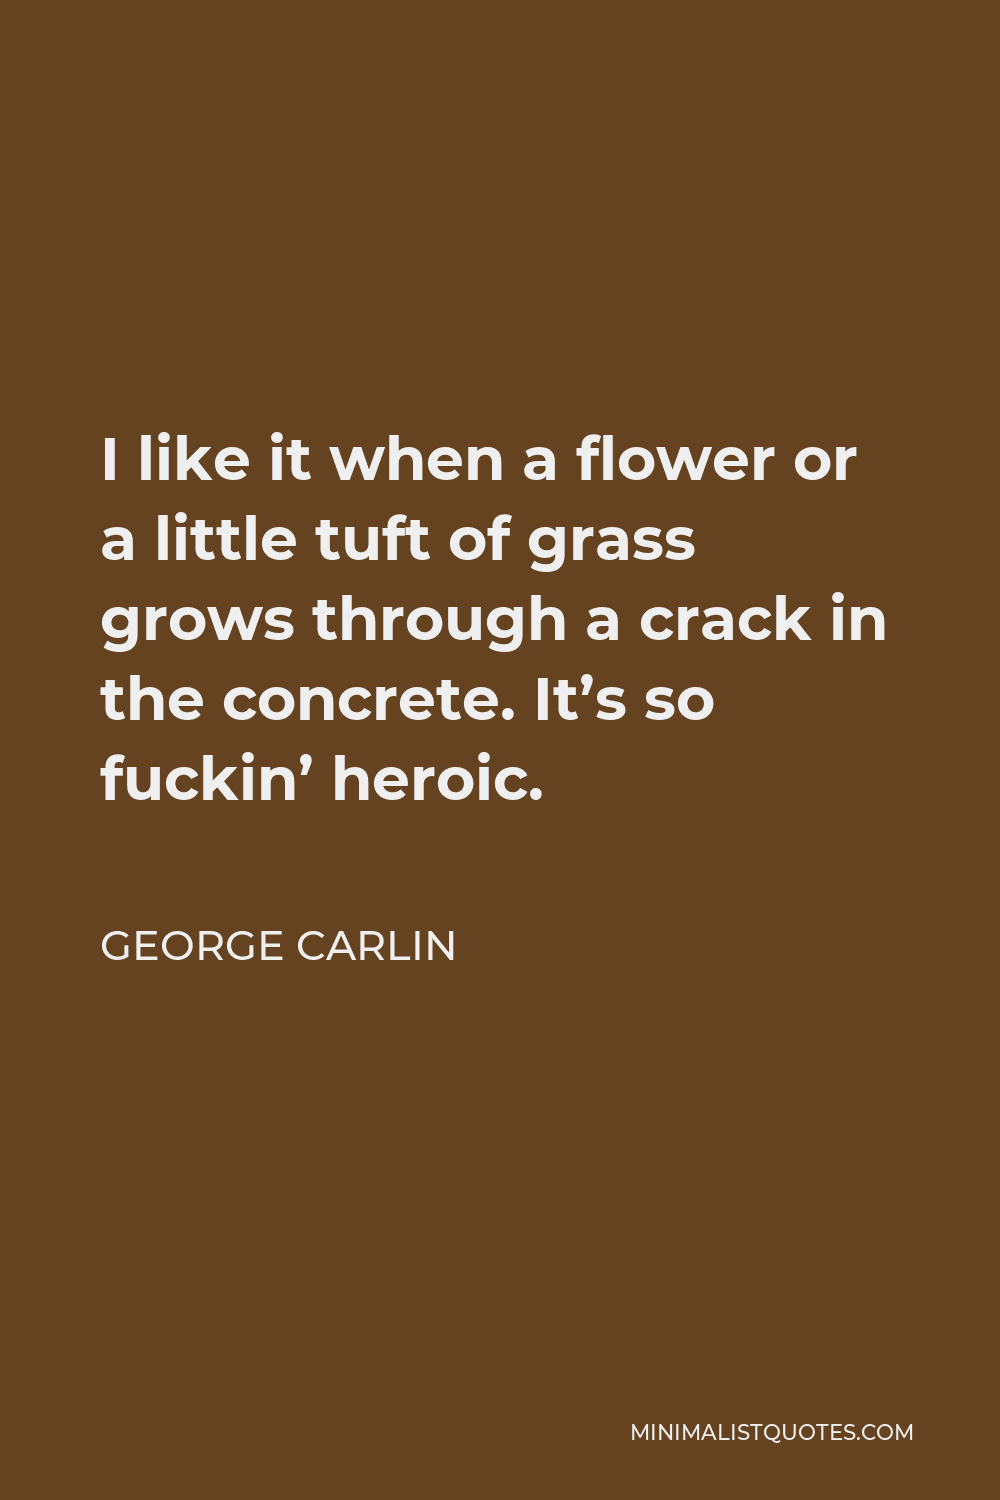 George Carlin Quote - I like it when a flower or a little tuft of grass grows through a crack in the concrete. It’s so fuckin’ heroic.